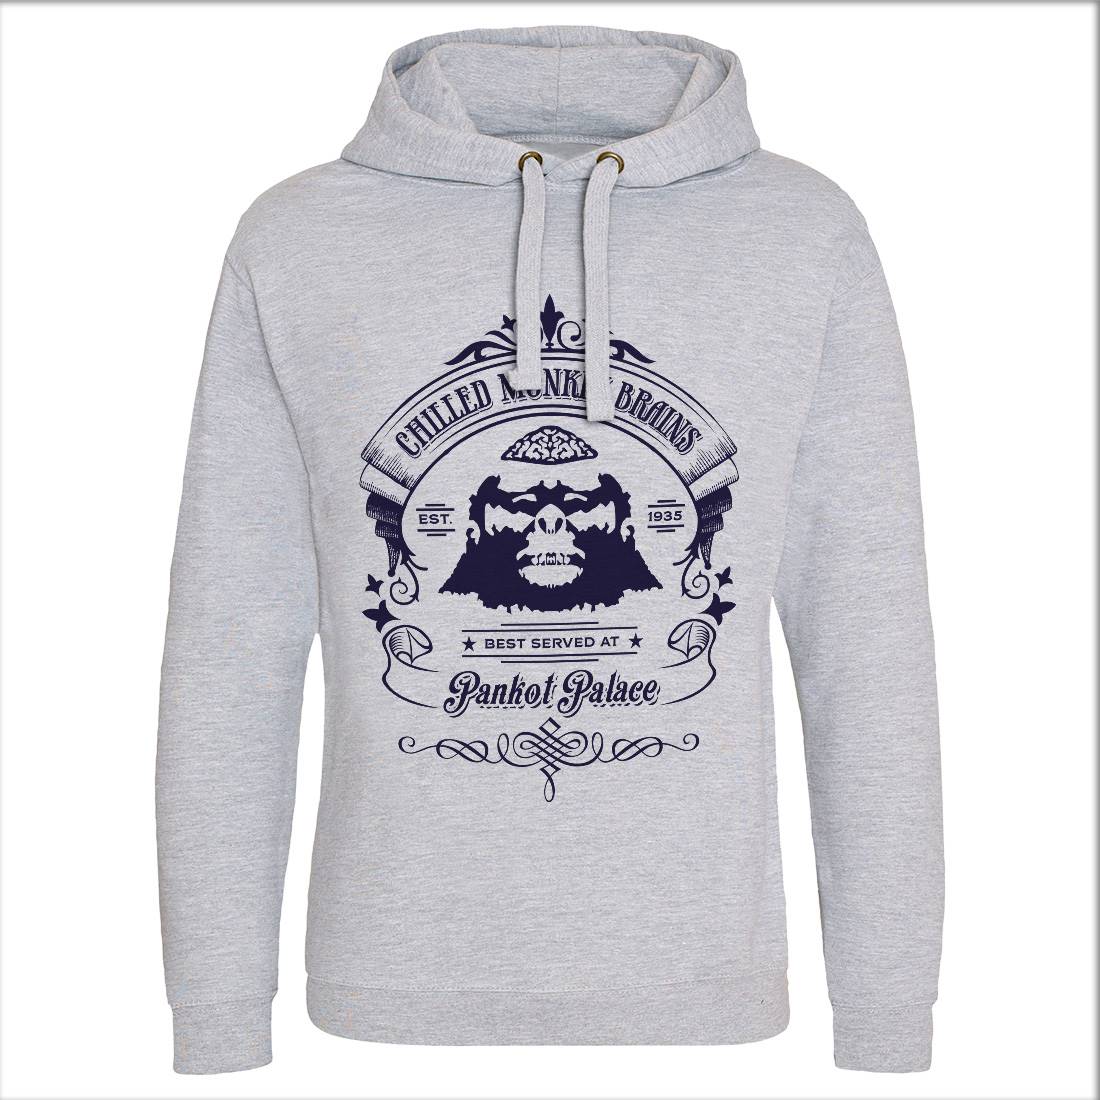 Chilled Monkey Brains Mens Hoodie Without Pocket Food D239